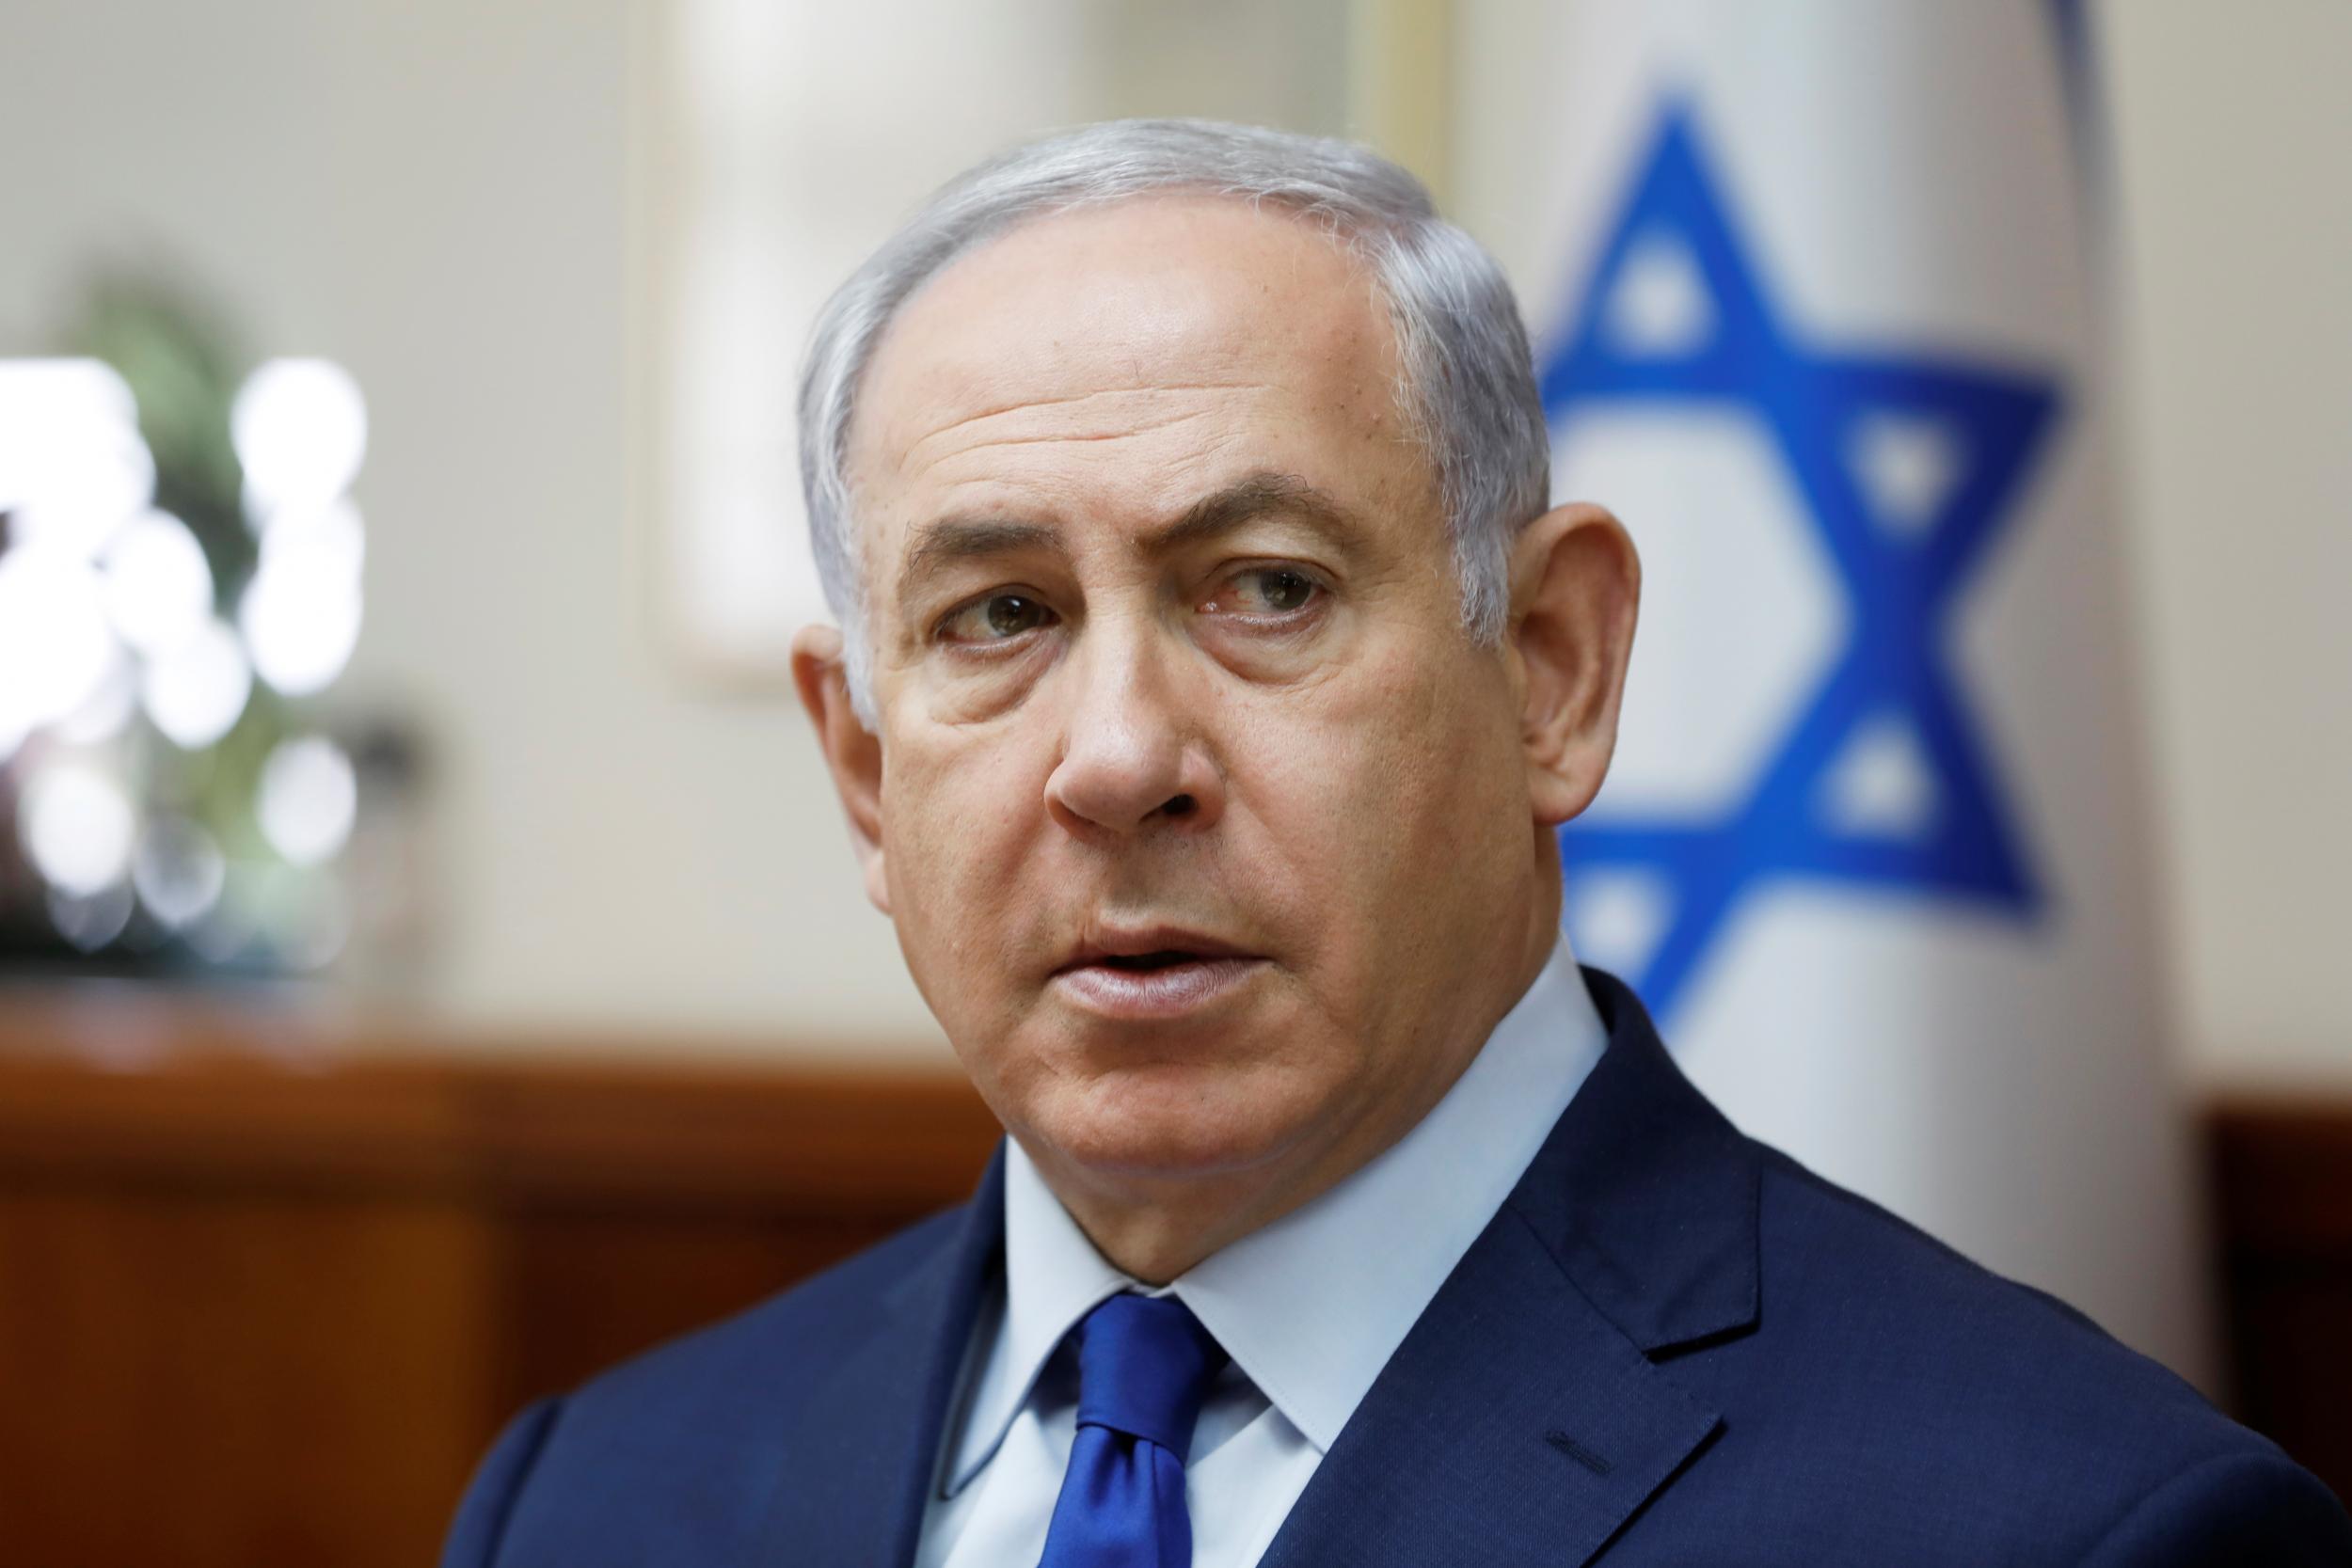 Netanyahu hail Chad for opening embassy in Israel